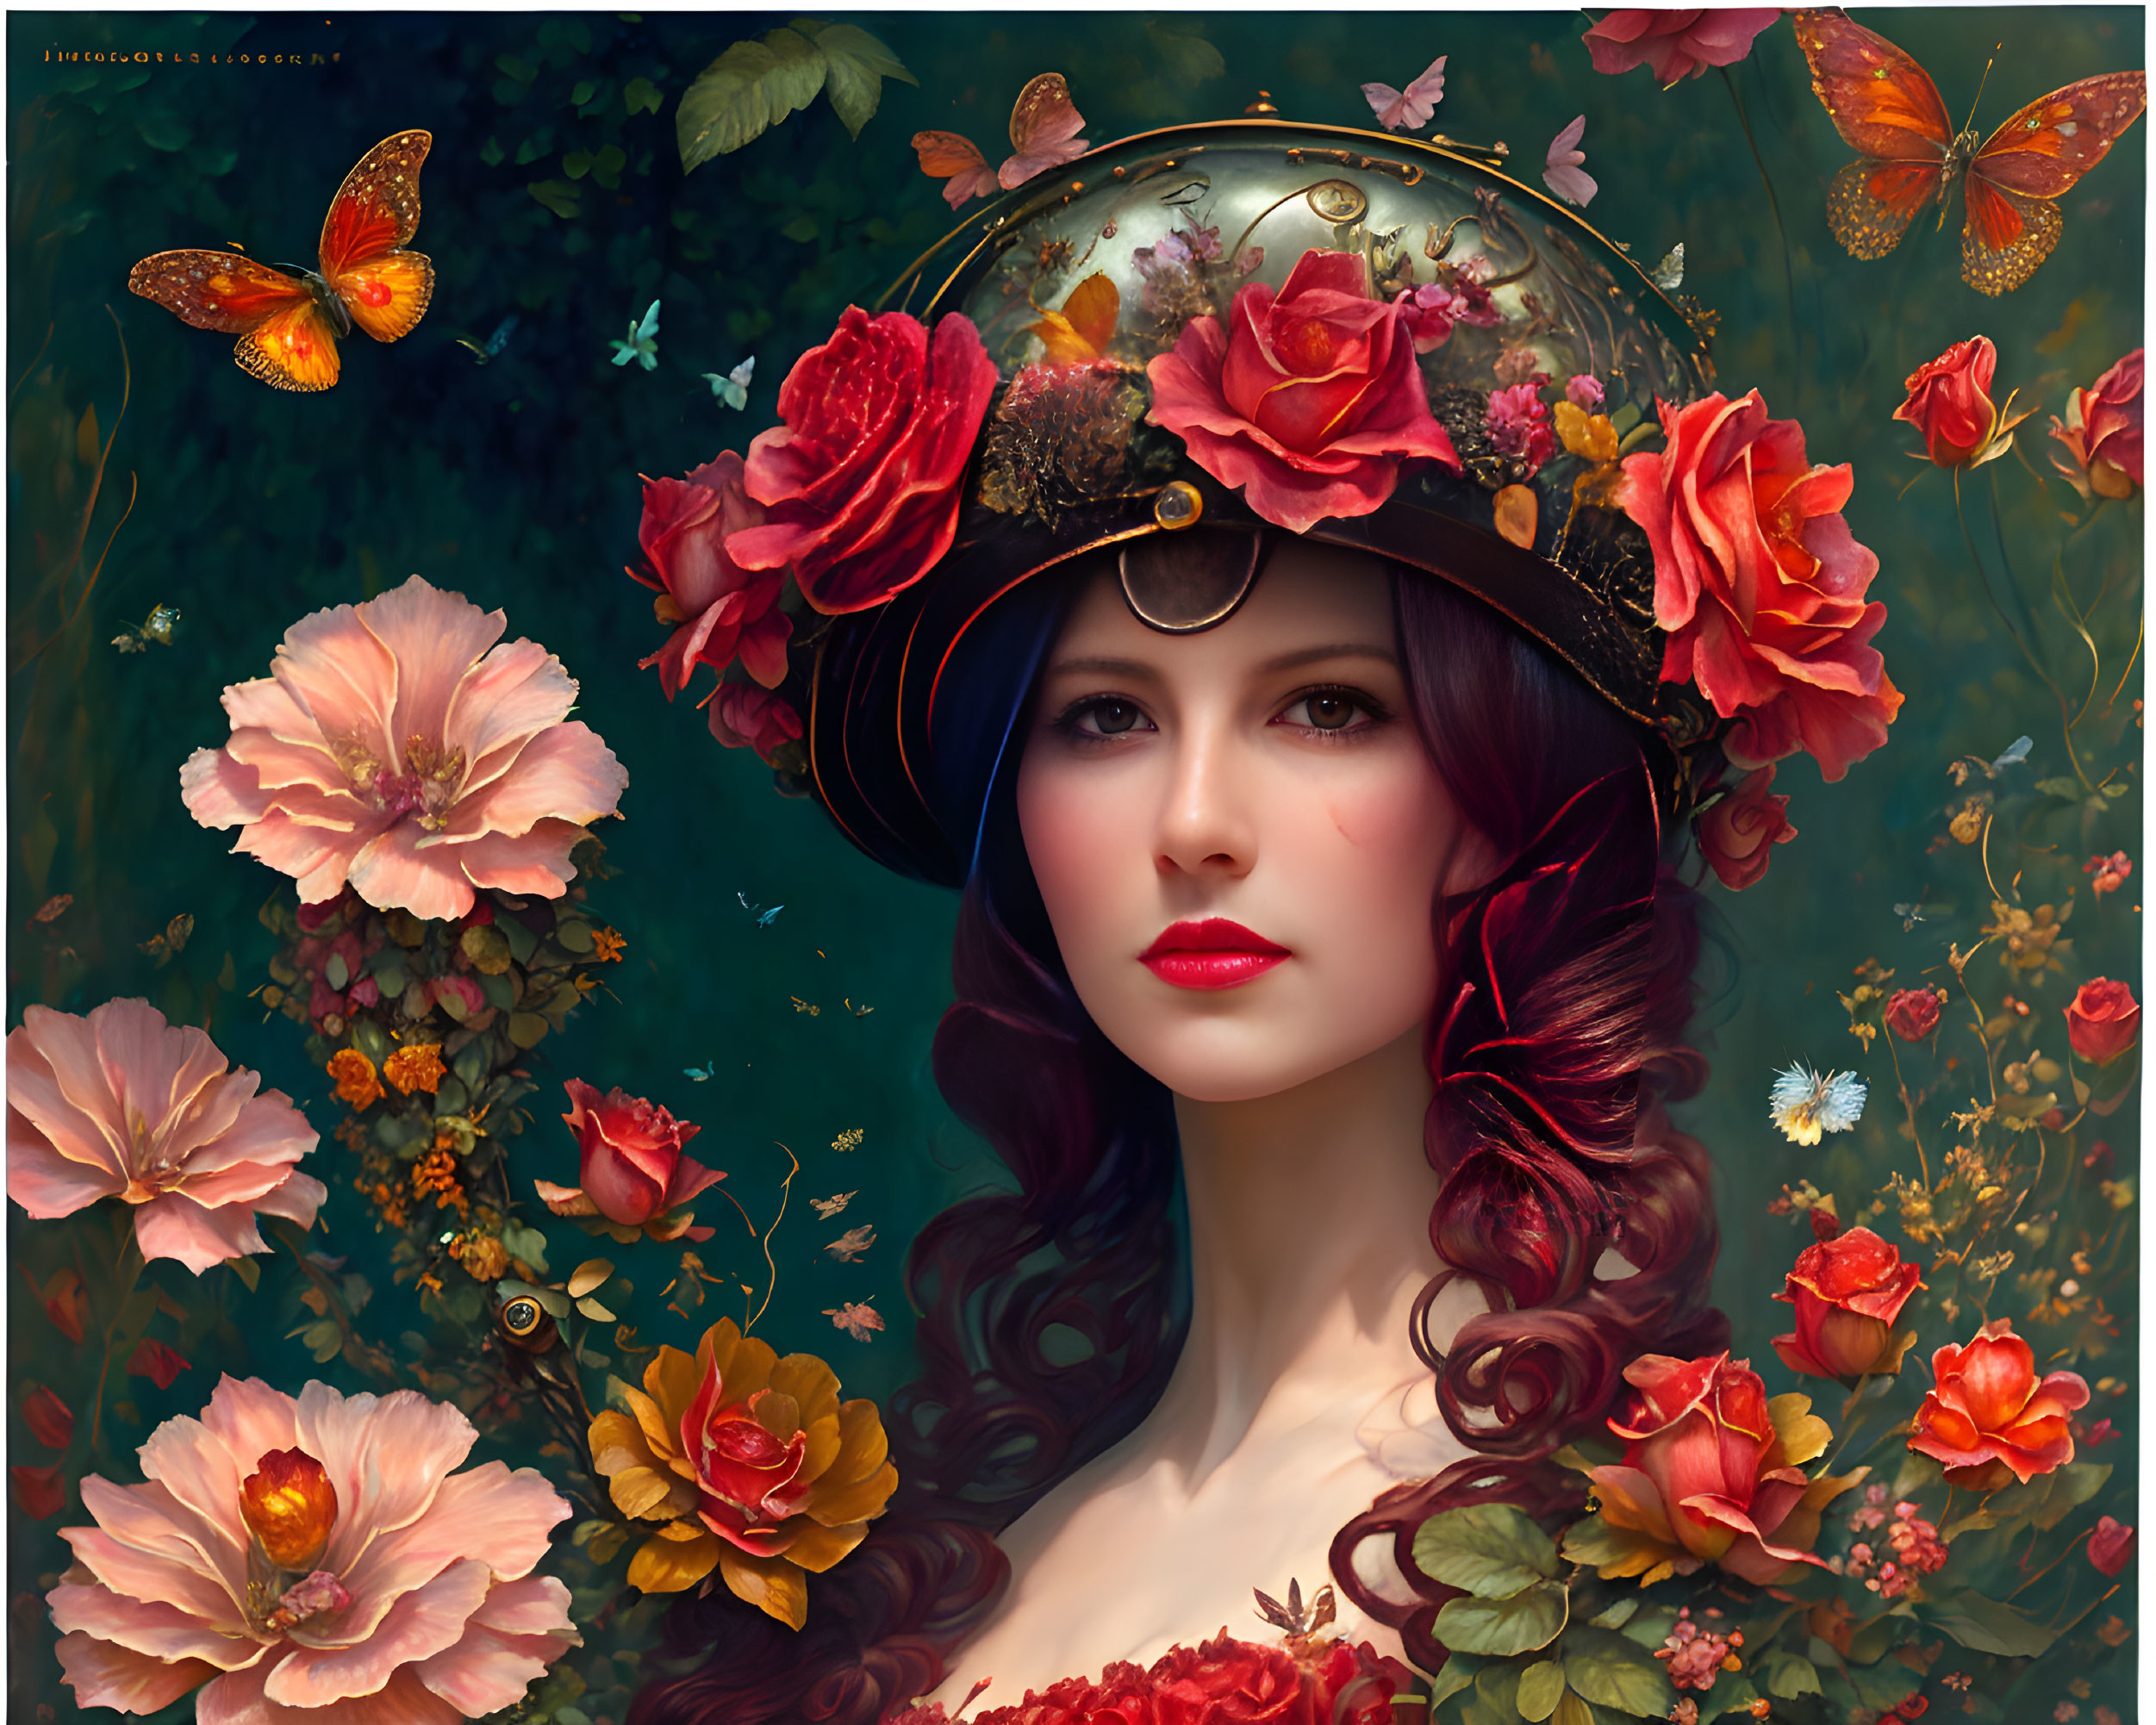 Woman with Red Flowers and Butterflies in Helmet Headgear Surrounded by Florals